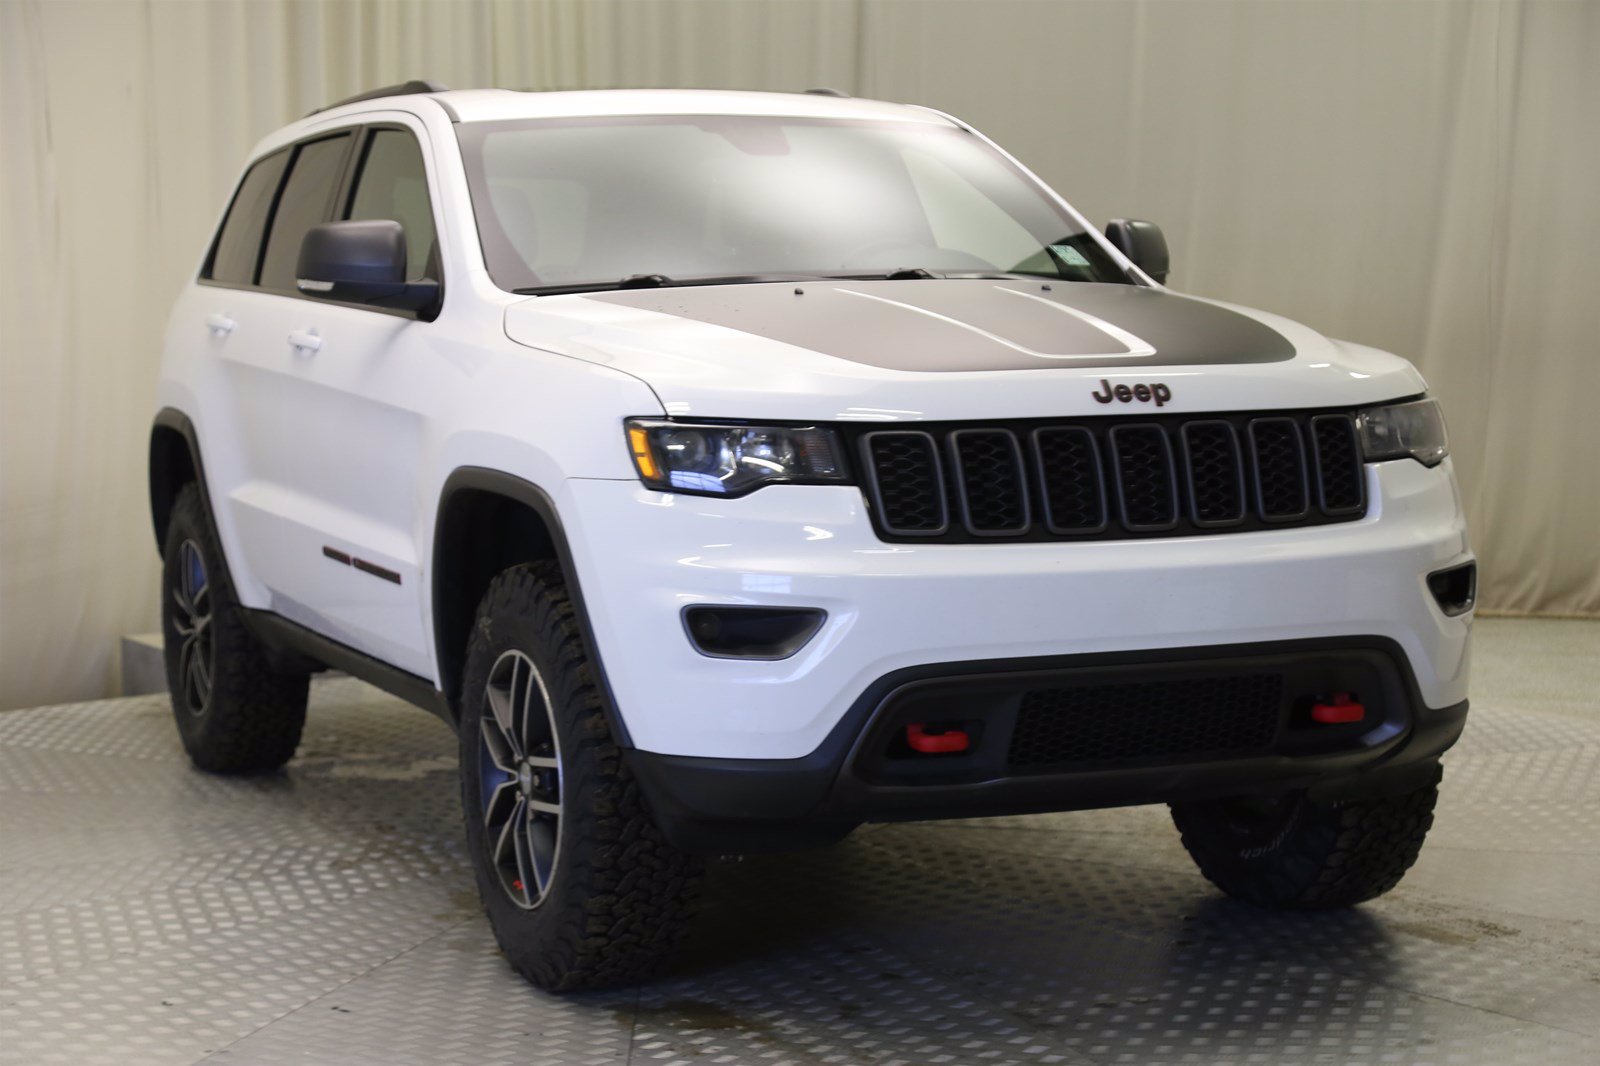 Certified PreOwned 2017 Jeep Grand Cherokee Trailhawk 4WD